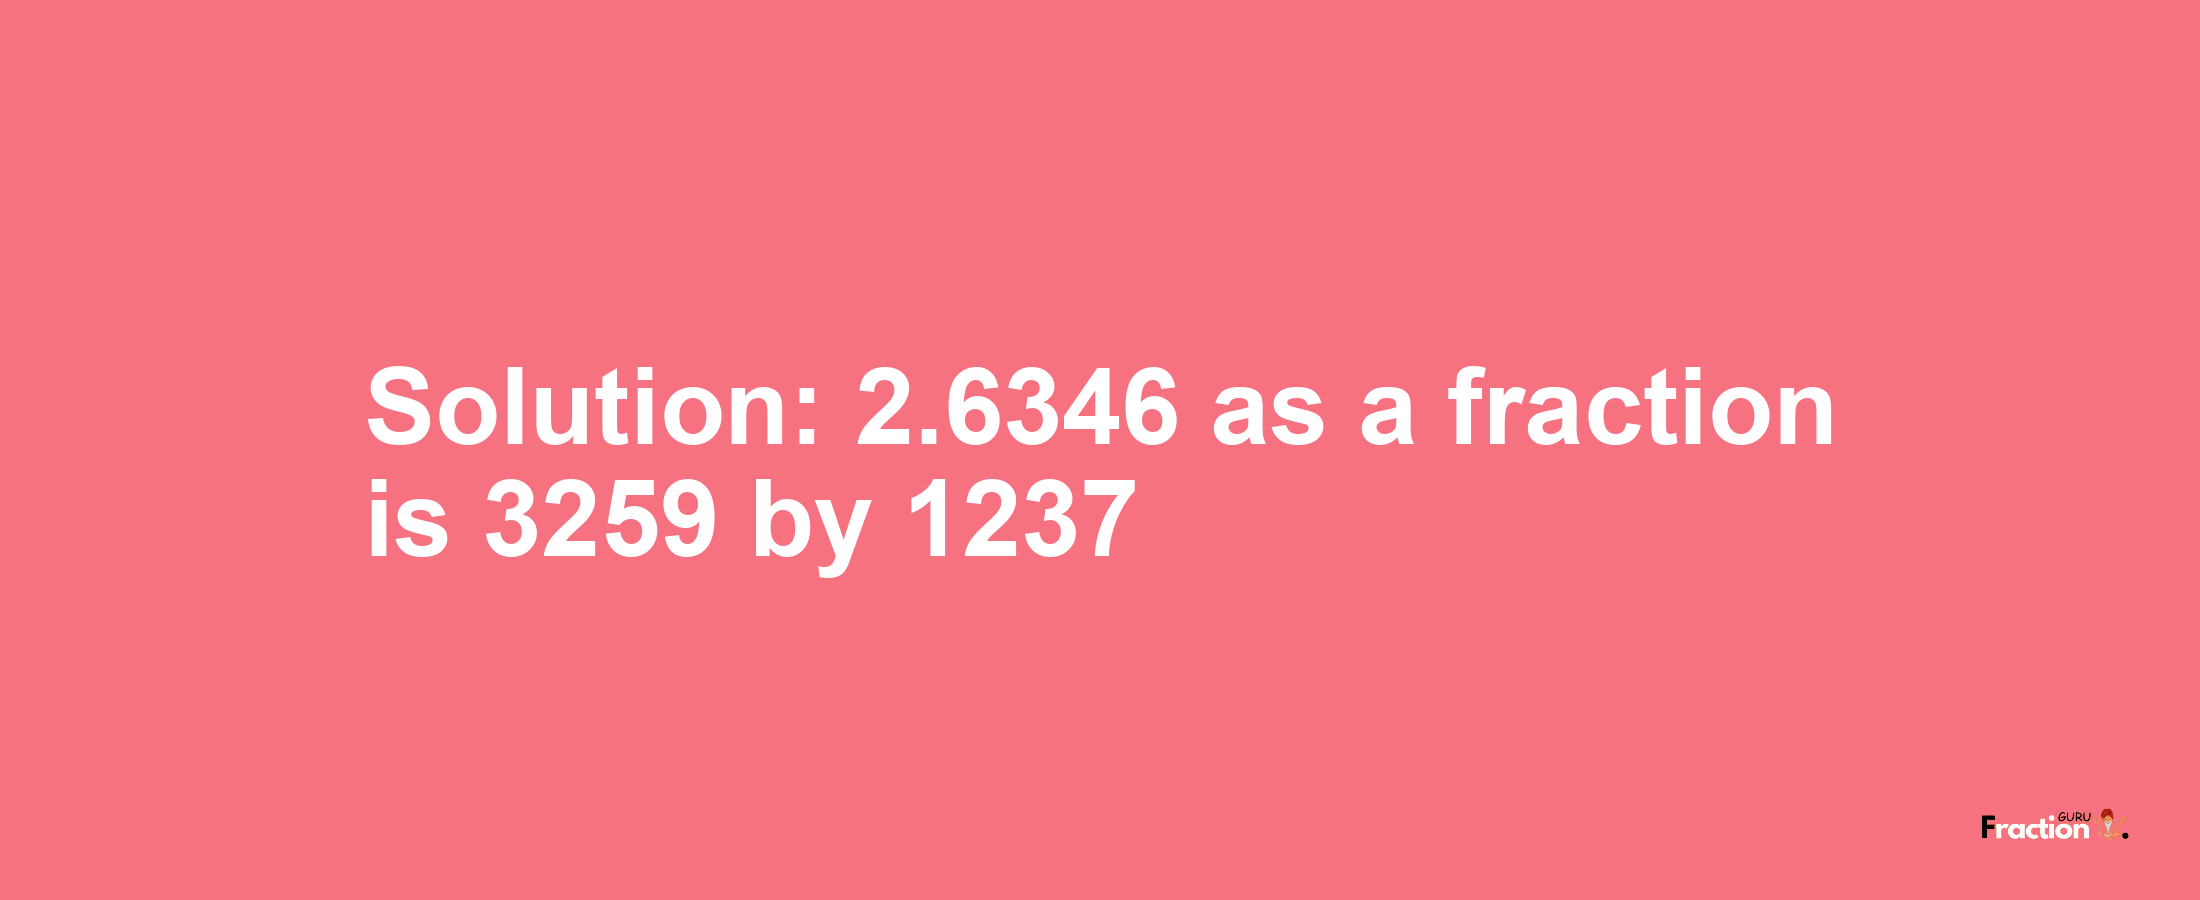 Solution:2.6346 as a fraction is 3259/1237